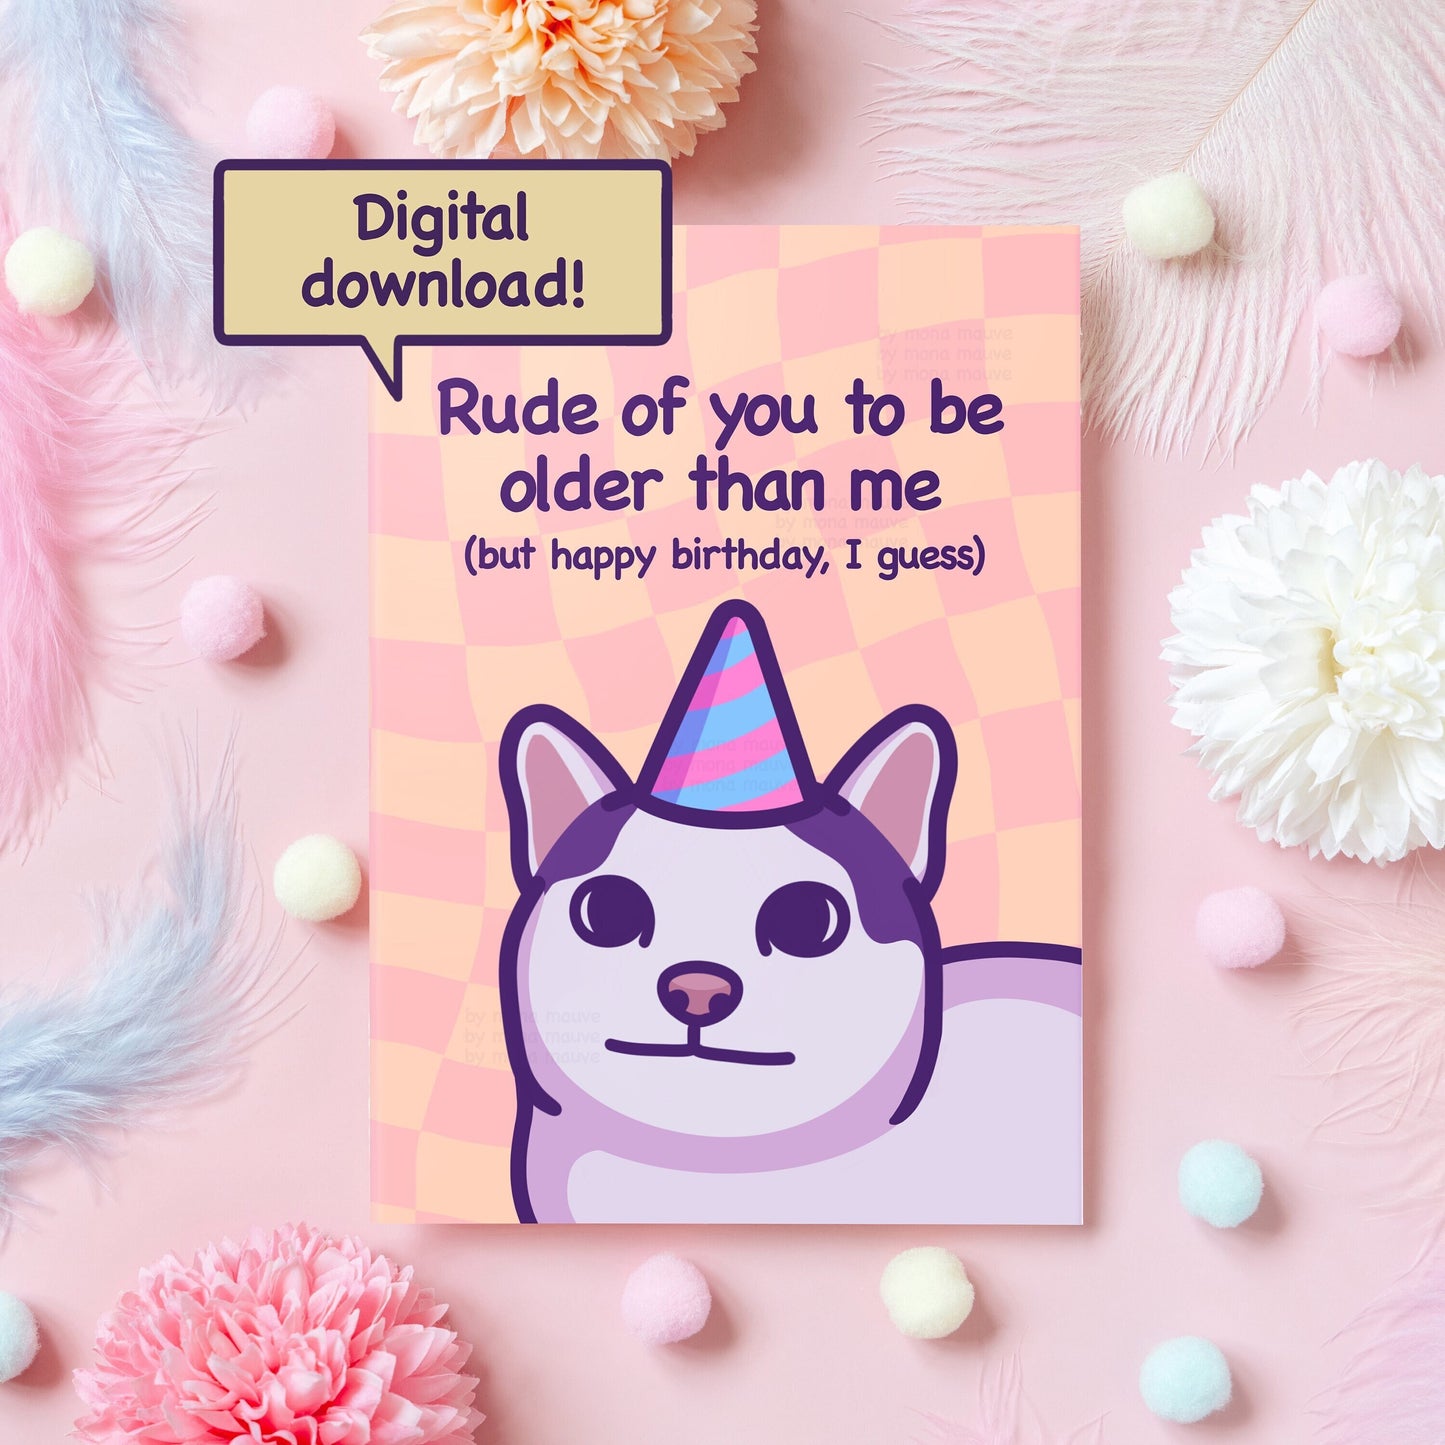 Funny Cat Birthday Card Digital Download | Rude of You to Be Older Than Me | Funny Gift For Boyfriend, Girlfriend, Husband - Her or Him